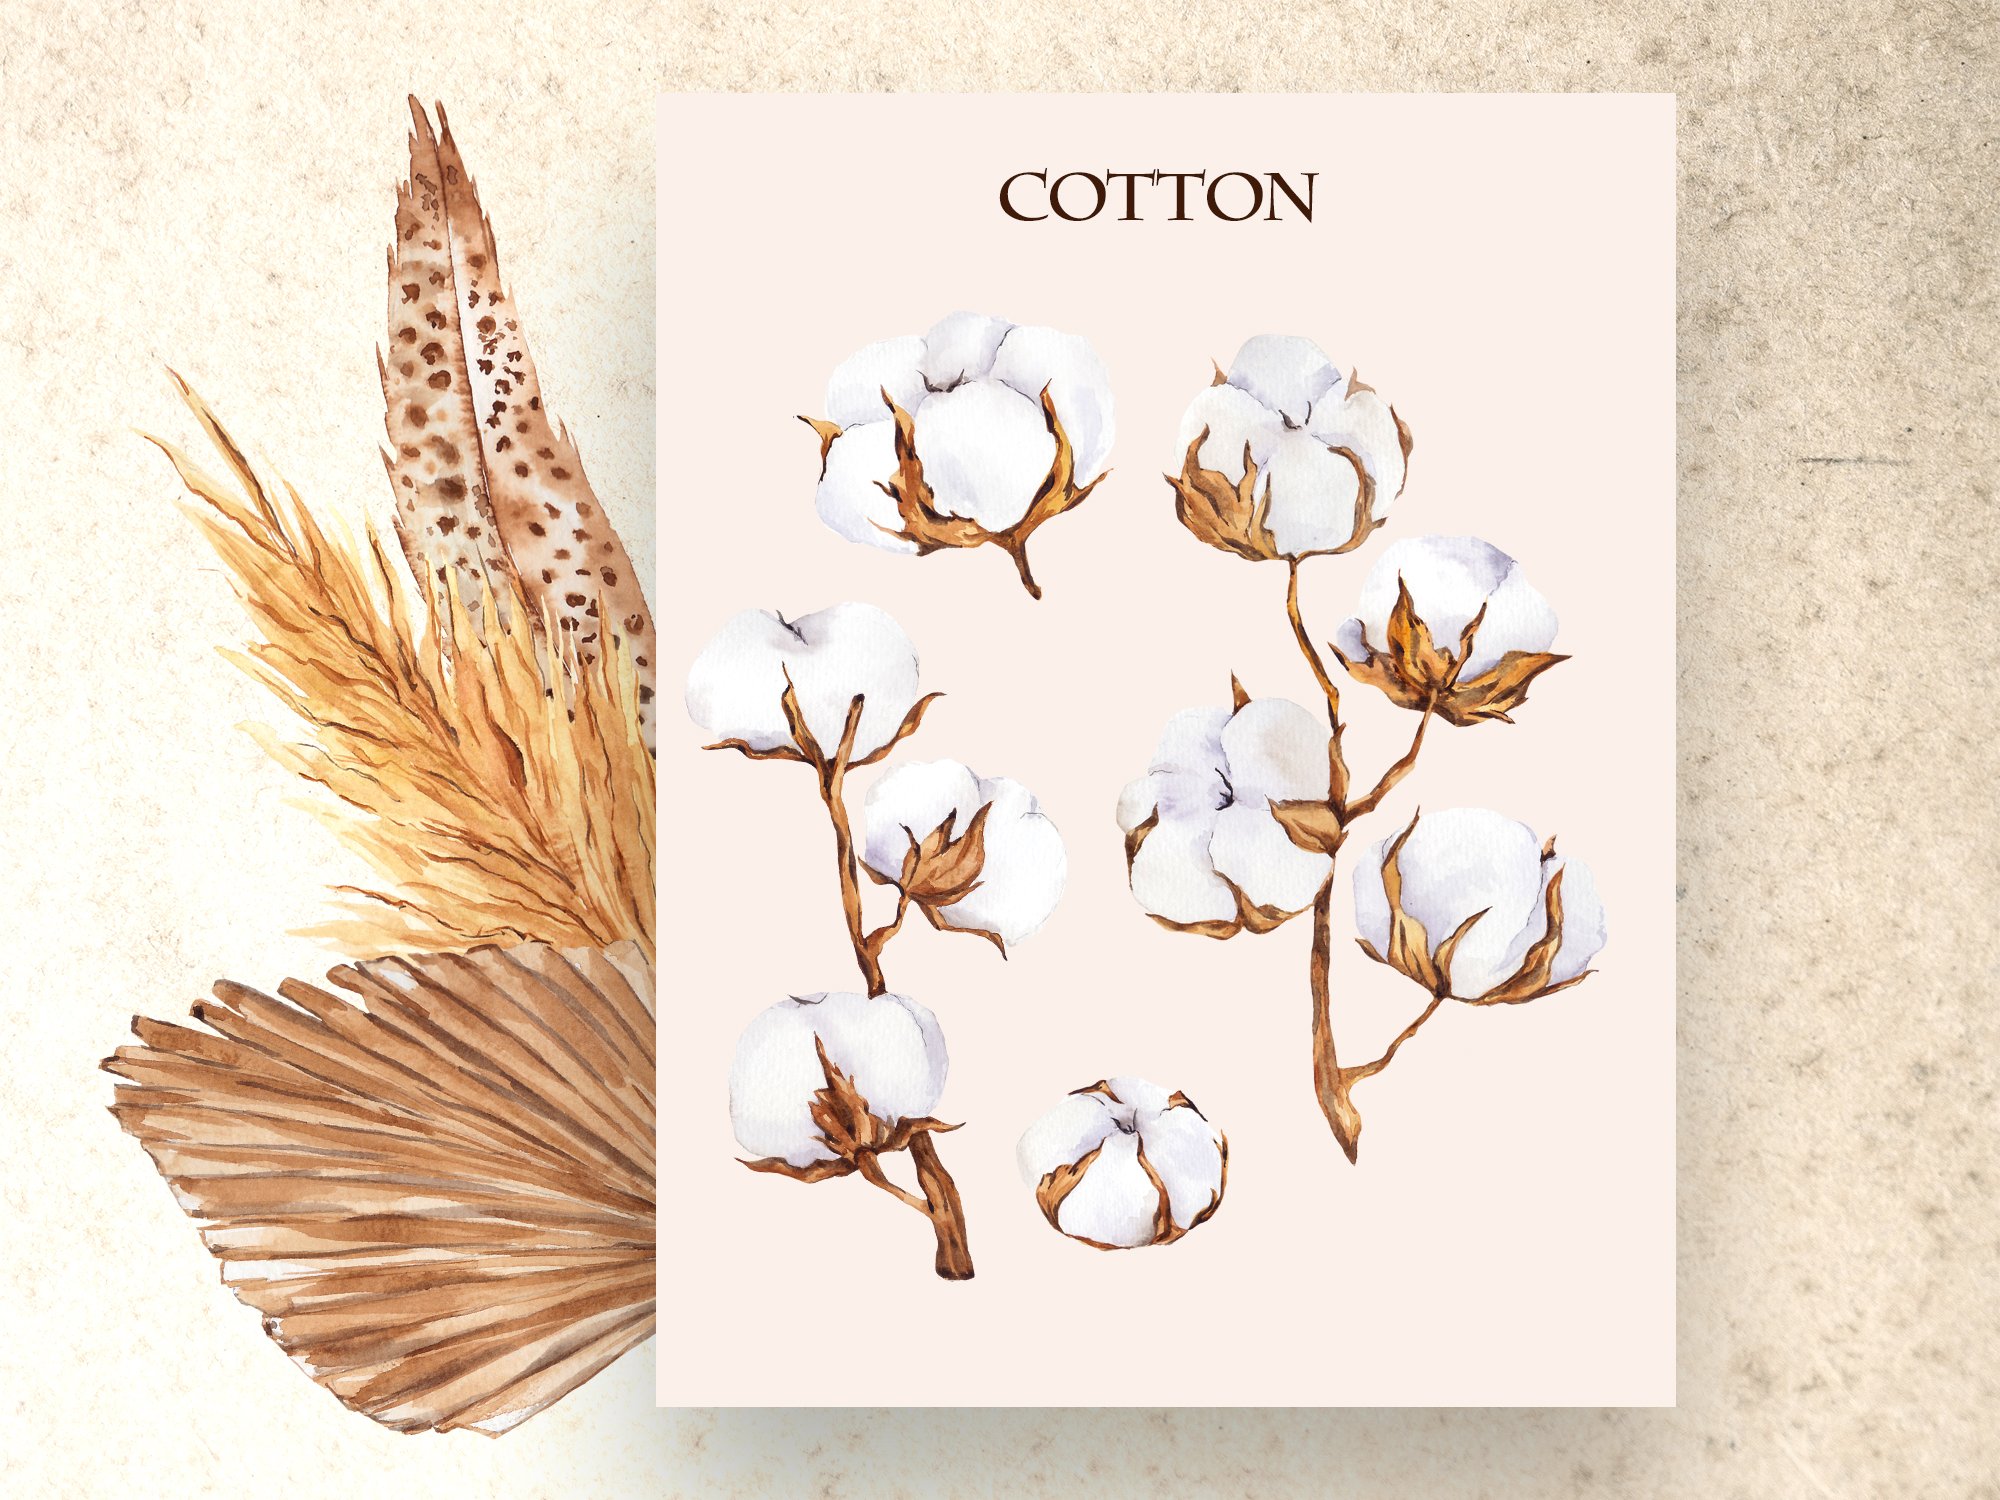 Card with cotton on it next to a feather.